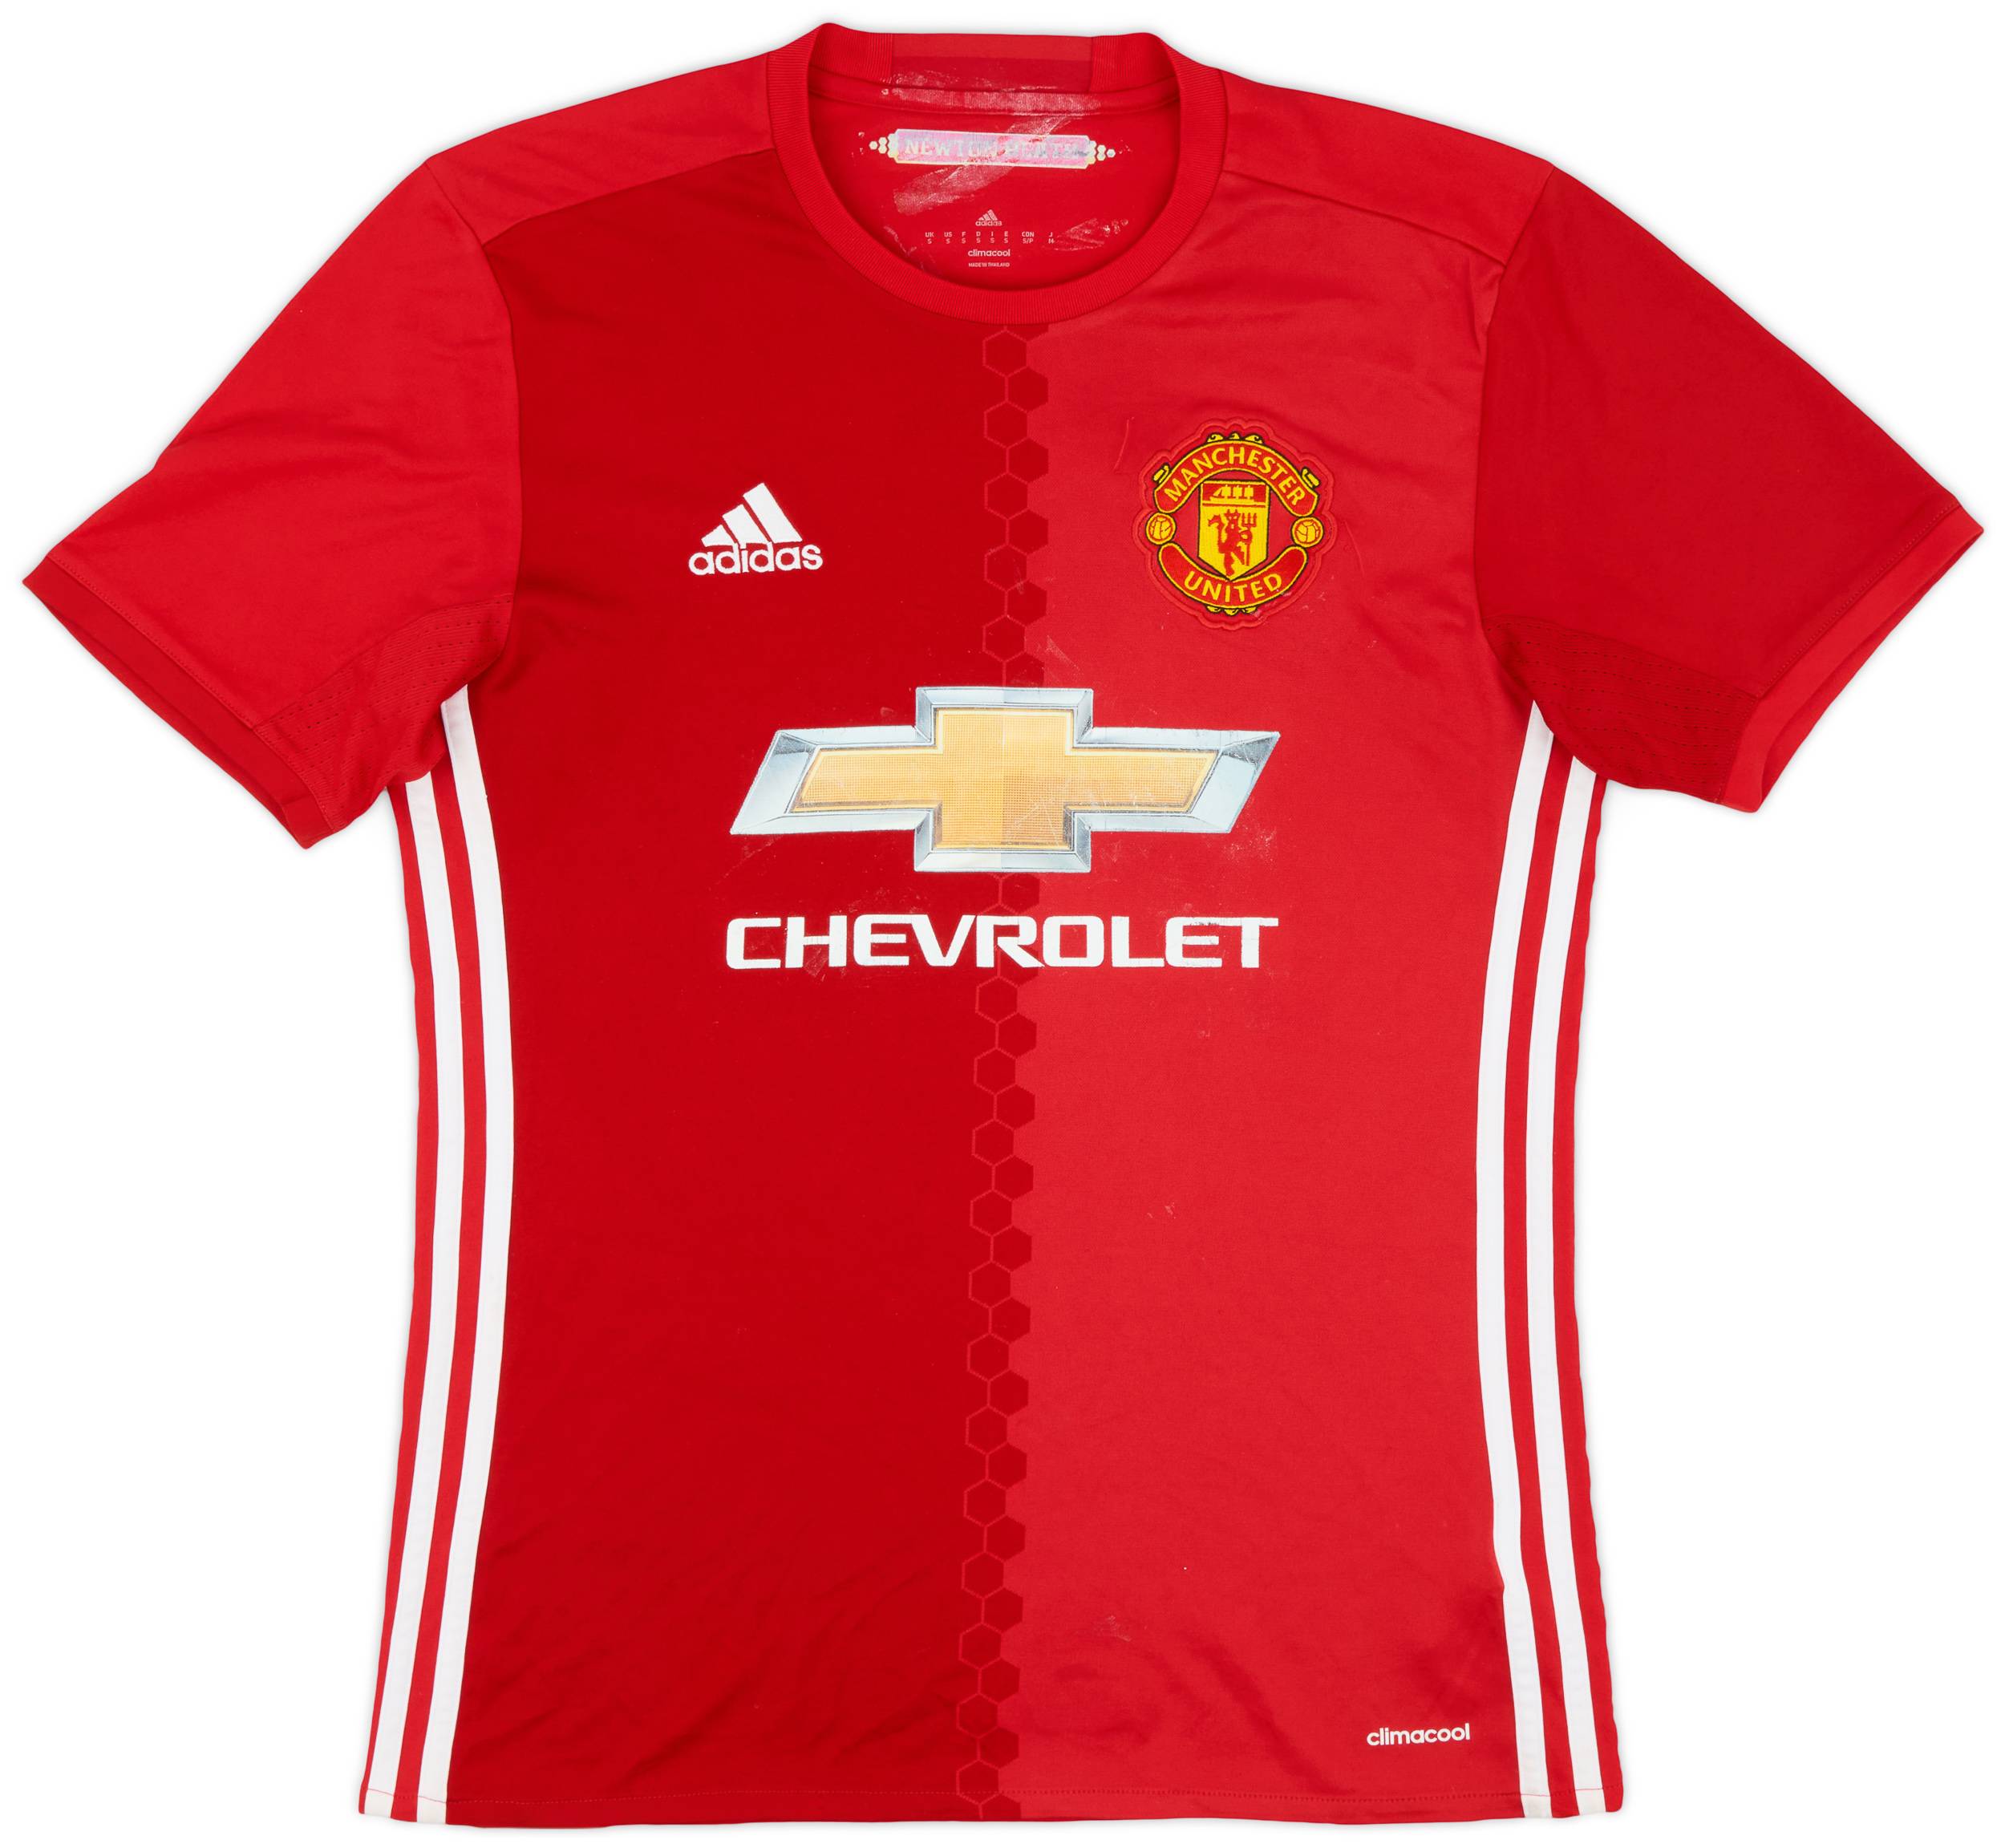 2016-17 Manchester United Home Shirt - 5/10 - (S)